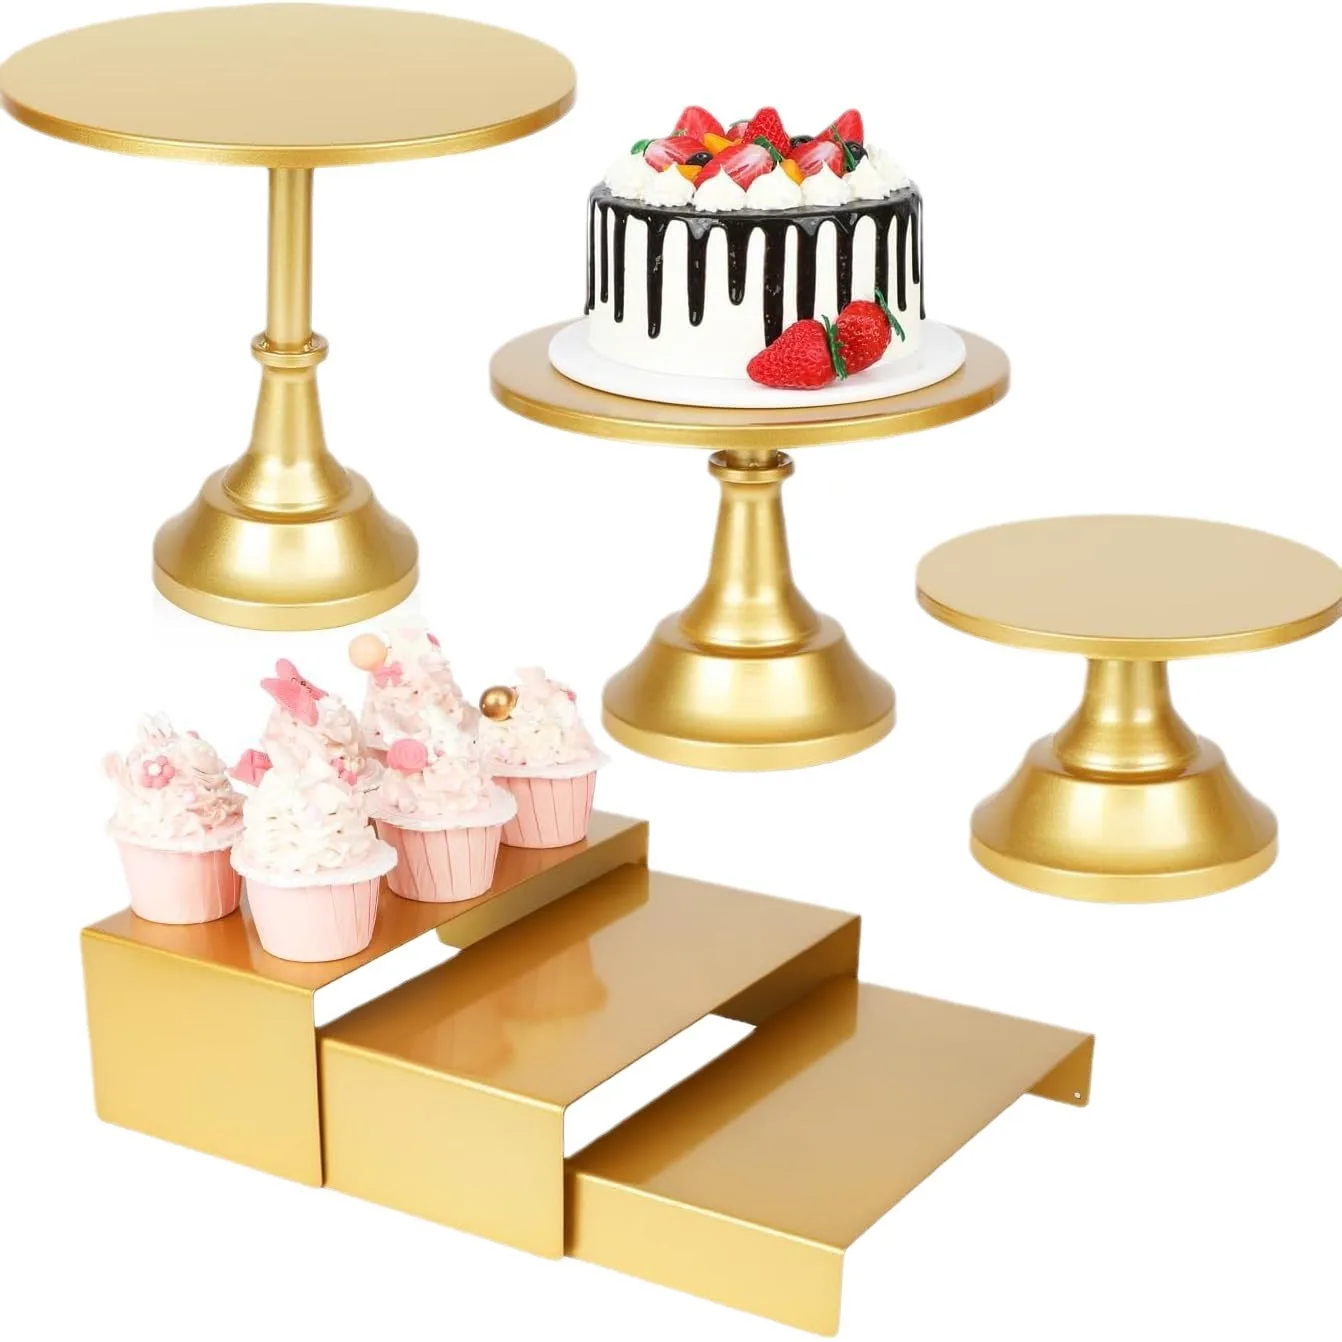 New arrivals 6pcs set gold cakes stand cake decorating  reposteria birthday party dessert table stands afternoon tea snack rack